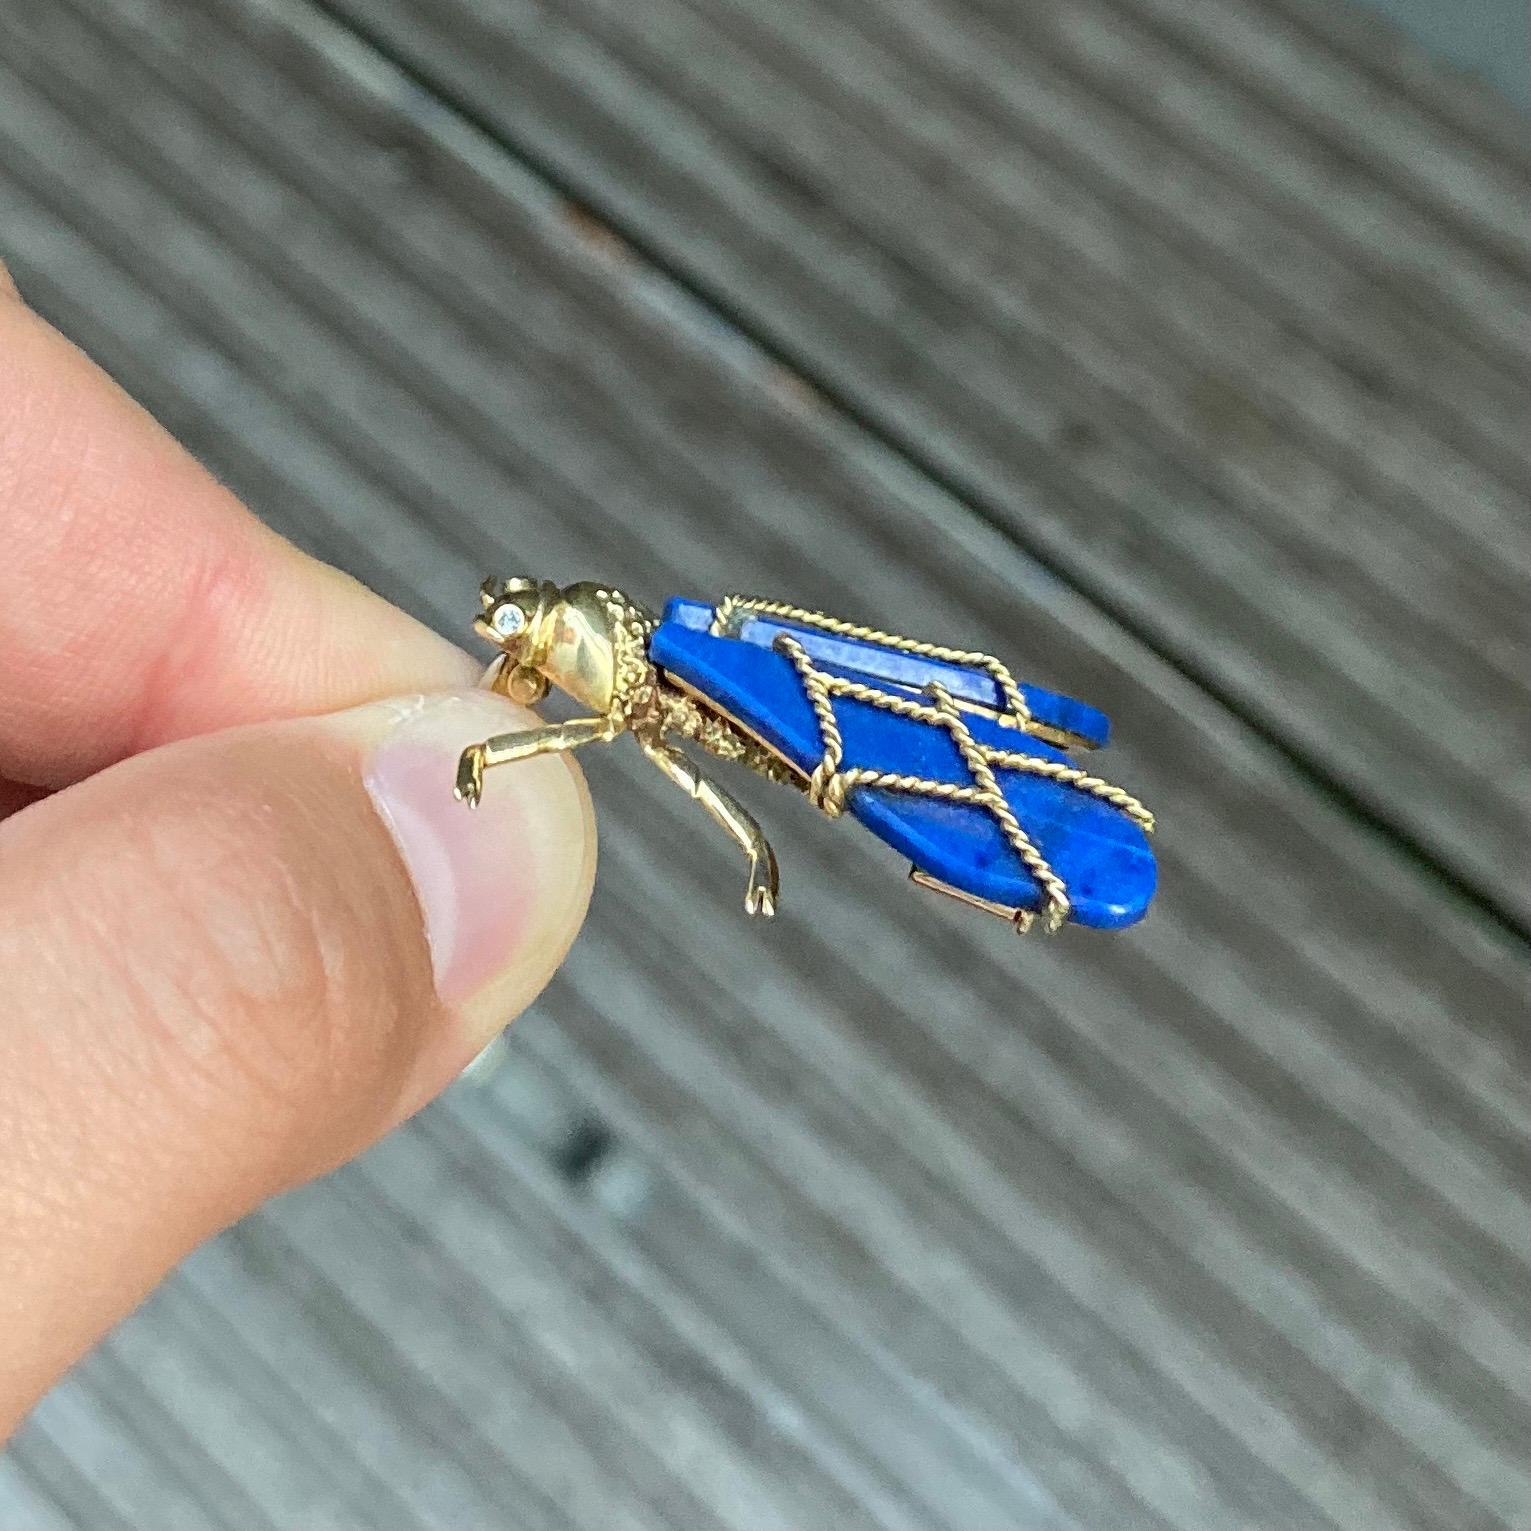 Round Cut Chaumet Vintage Lapis Lazuli Diamond Queen Bee Fly Brooch 18K Yellow Gold 1970s